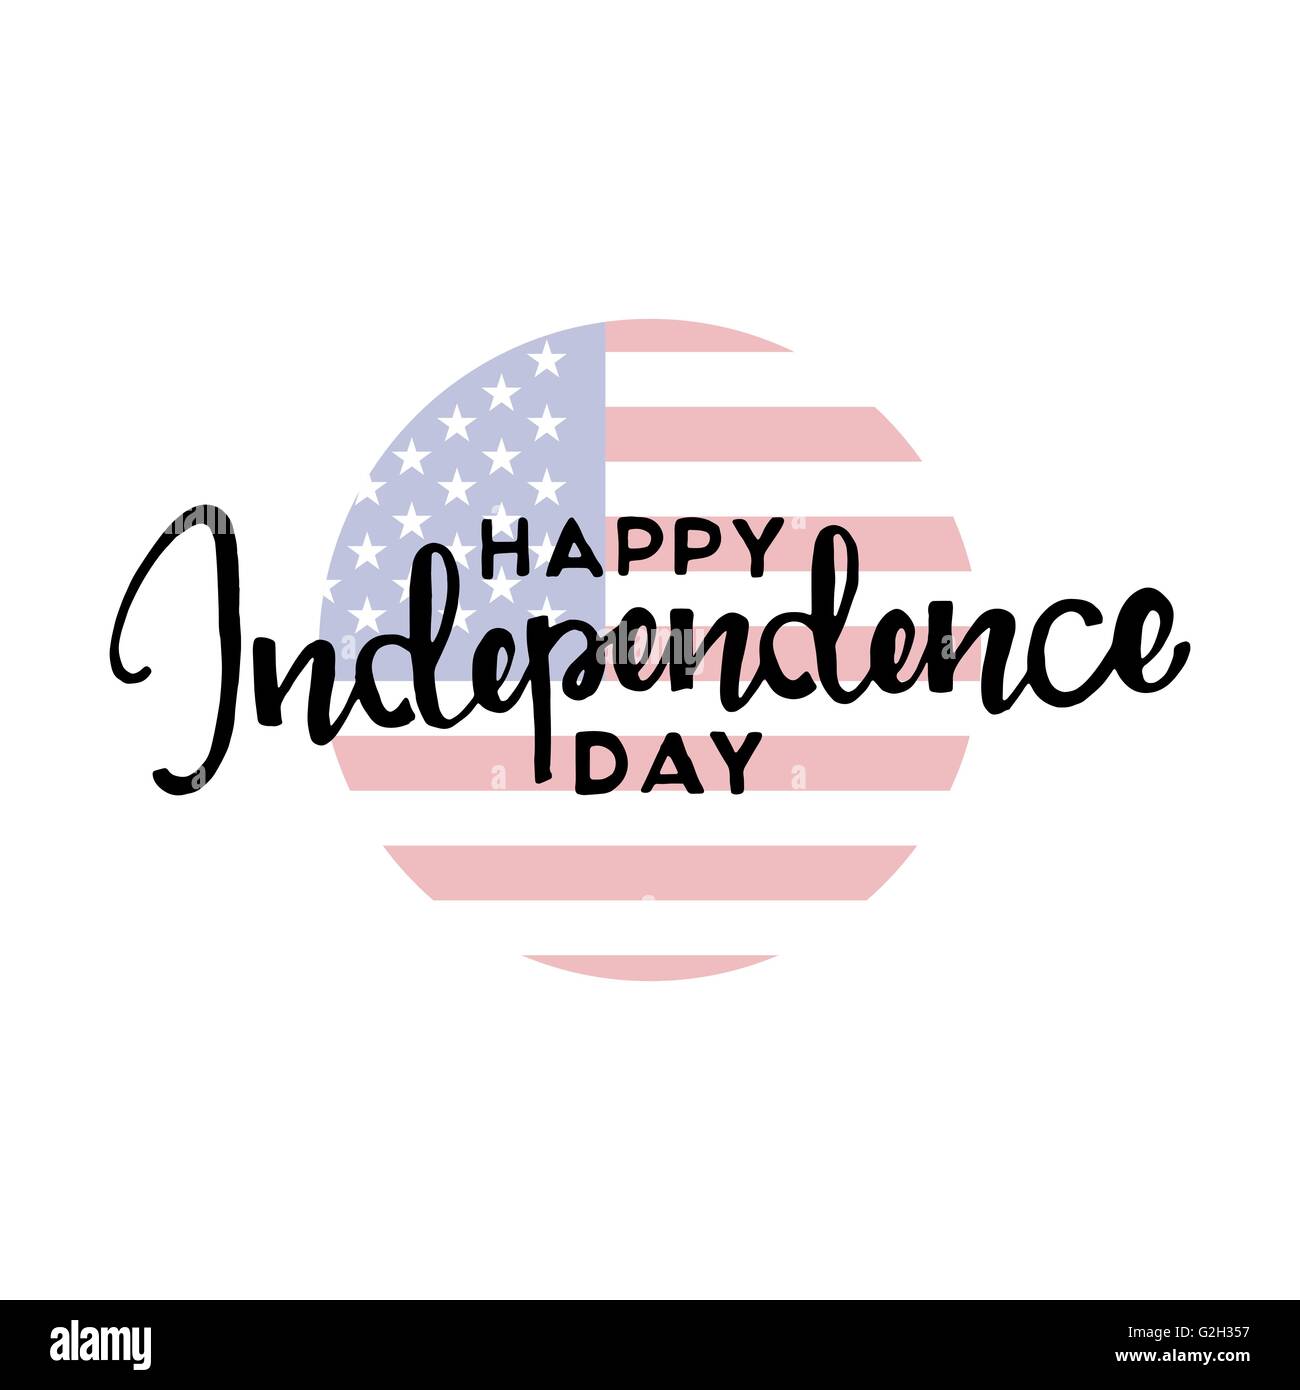 Happy Independence Day - PDF Free Download